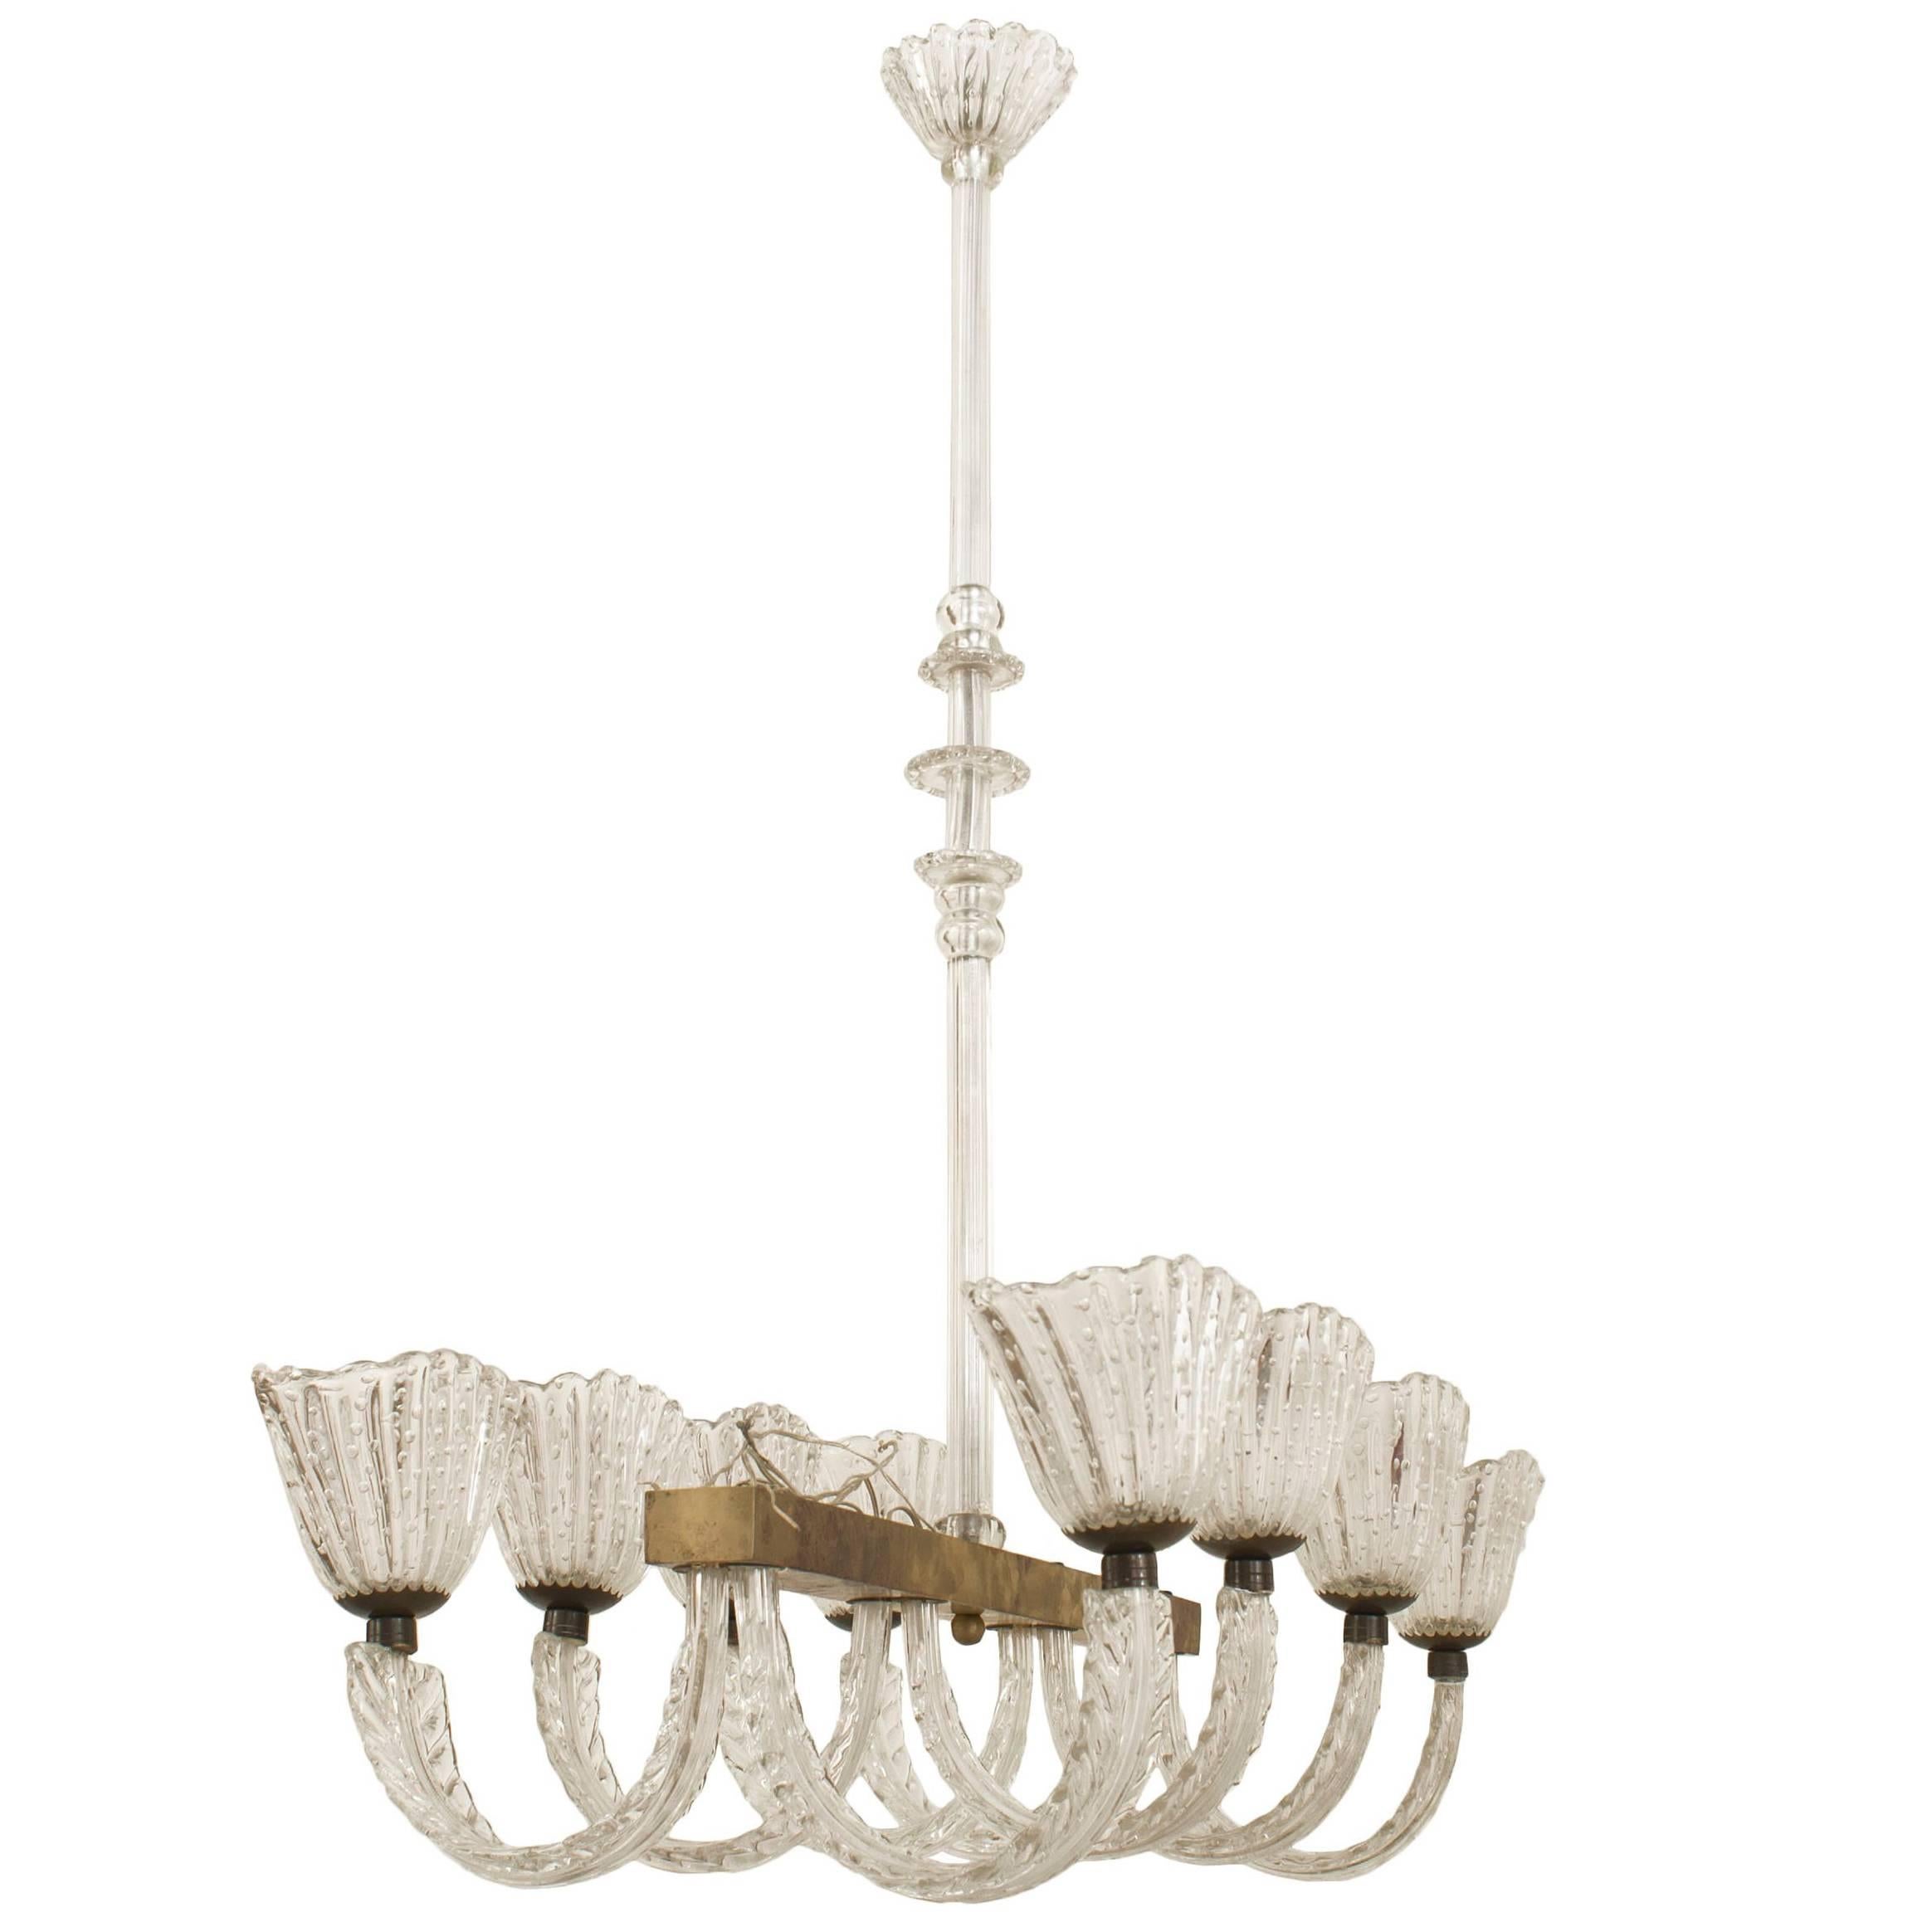 Barovier et Toso Italian Mid-Century Metal and Glass Chandelier For Sale